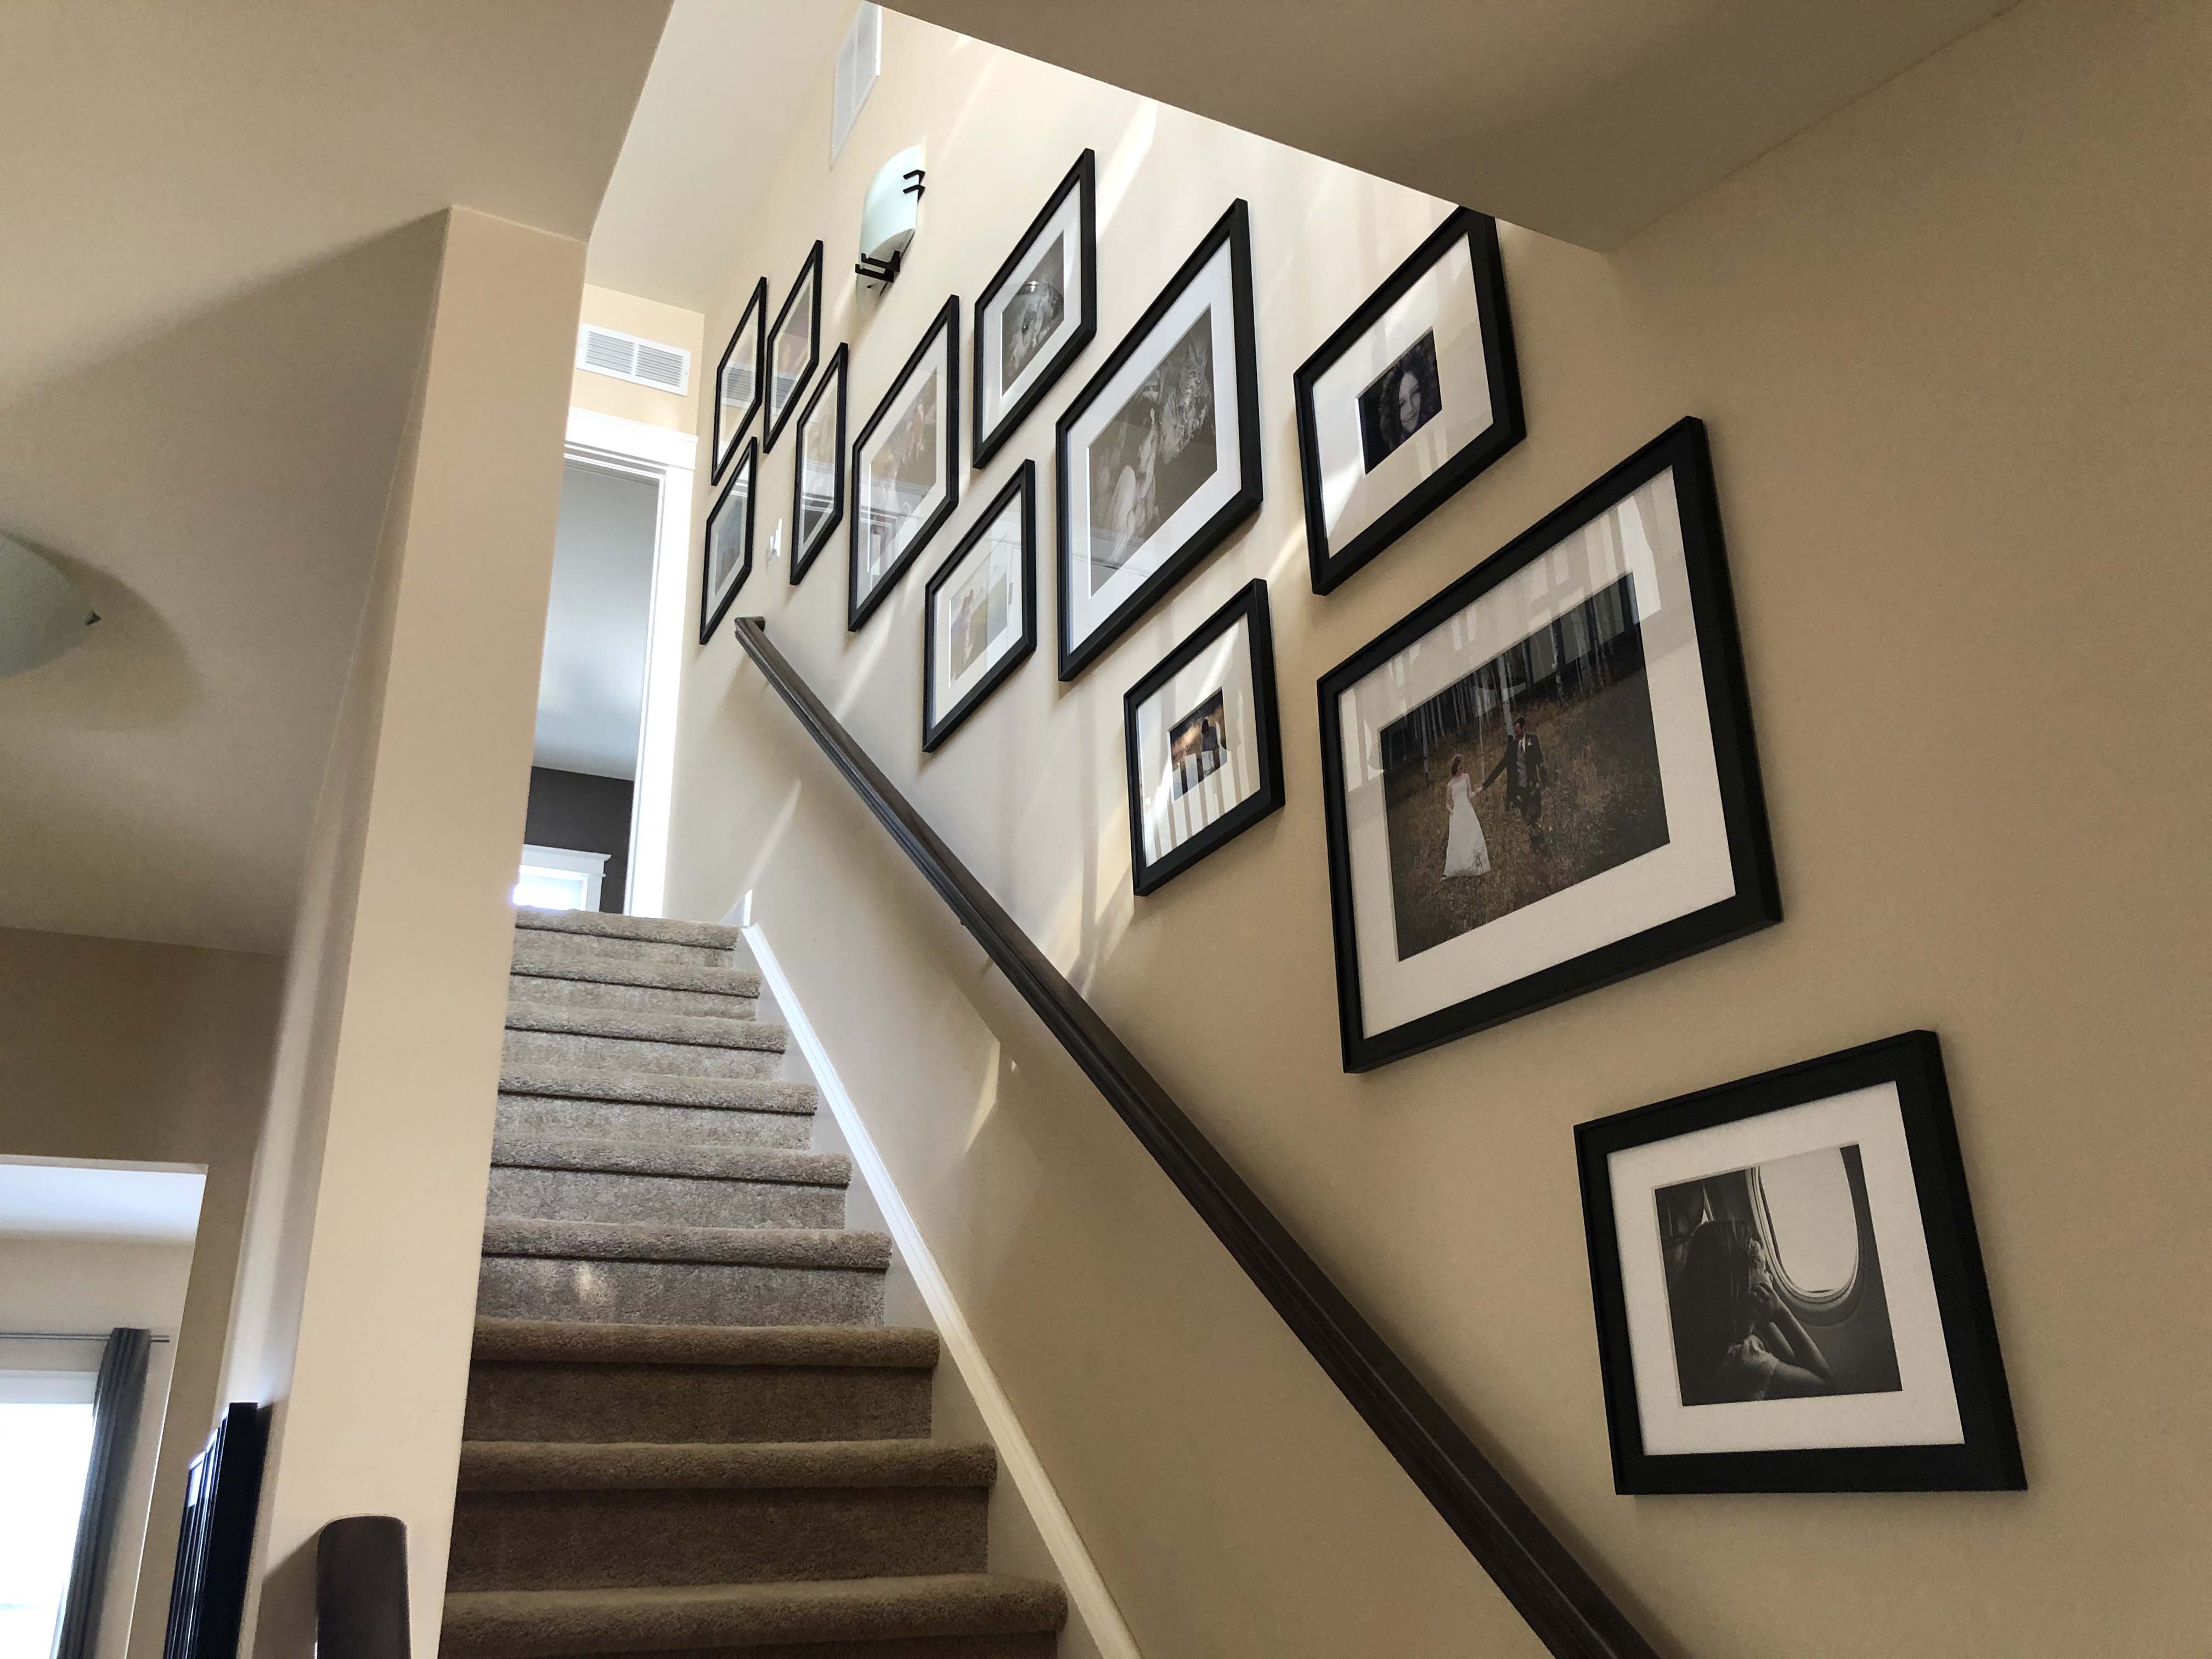 5 Great Ways To Display Your Family Photos From Your Phone to Home